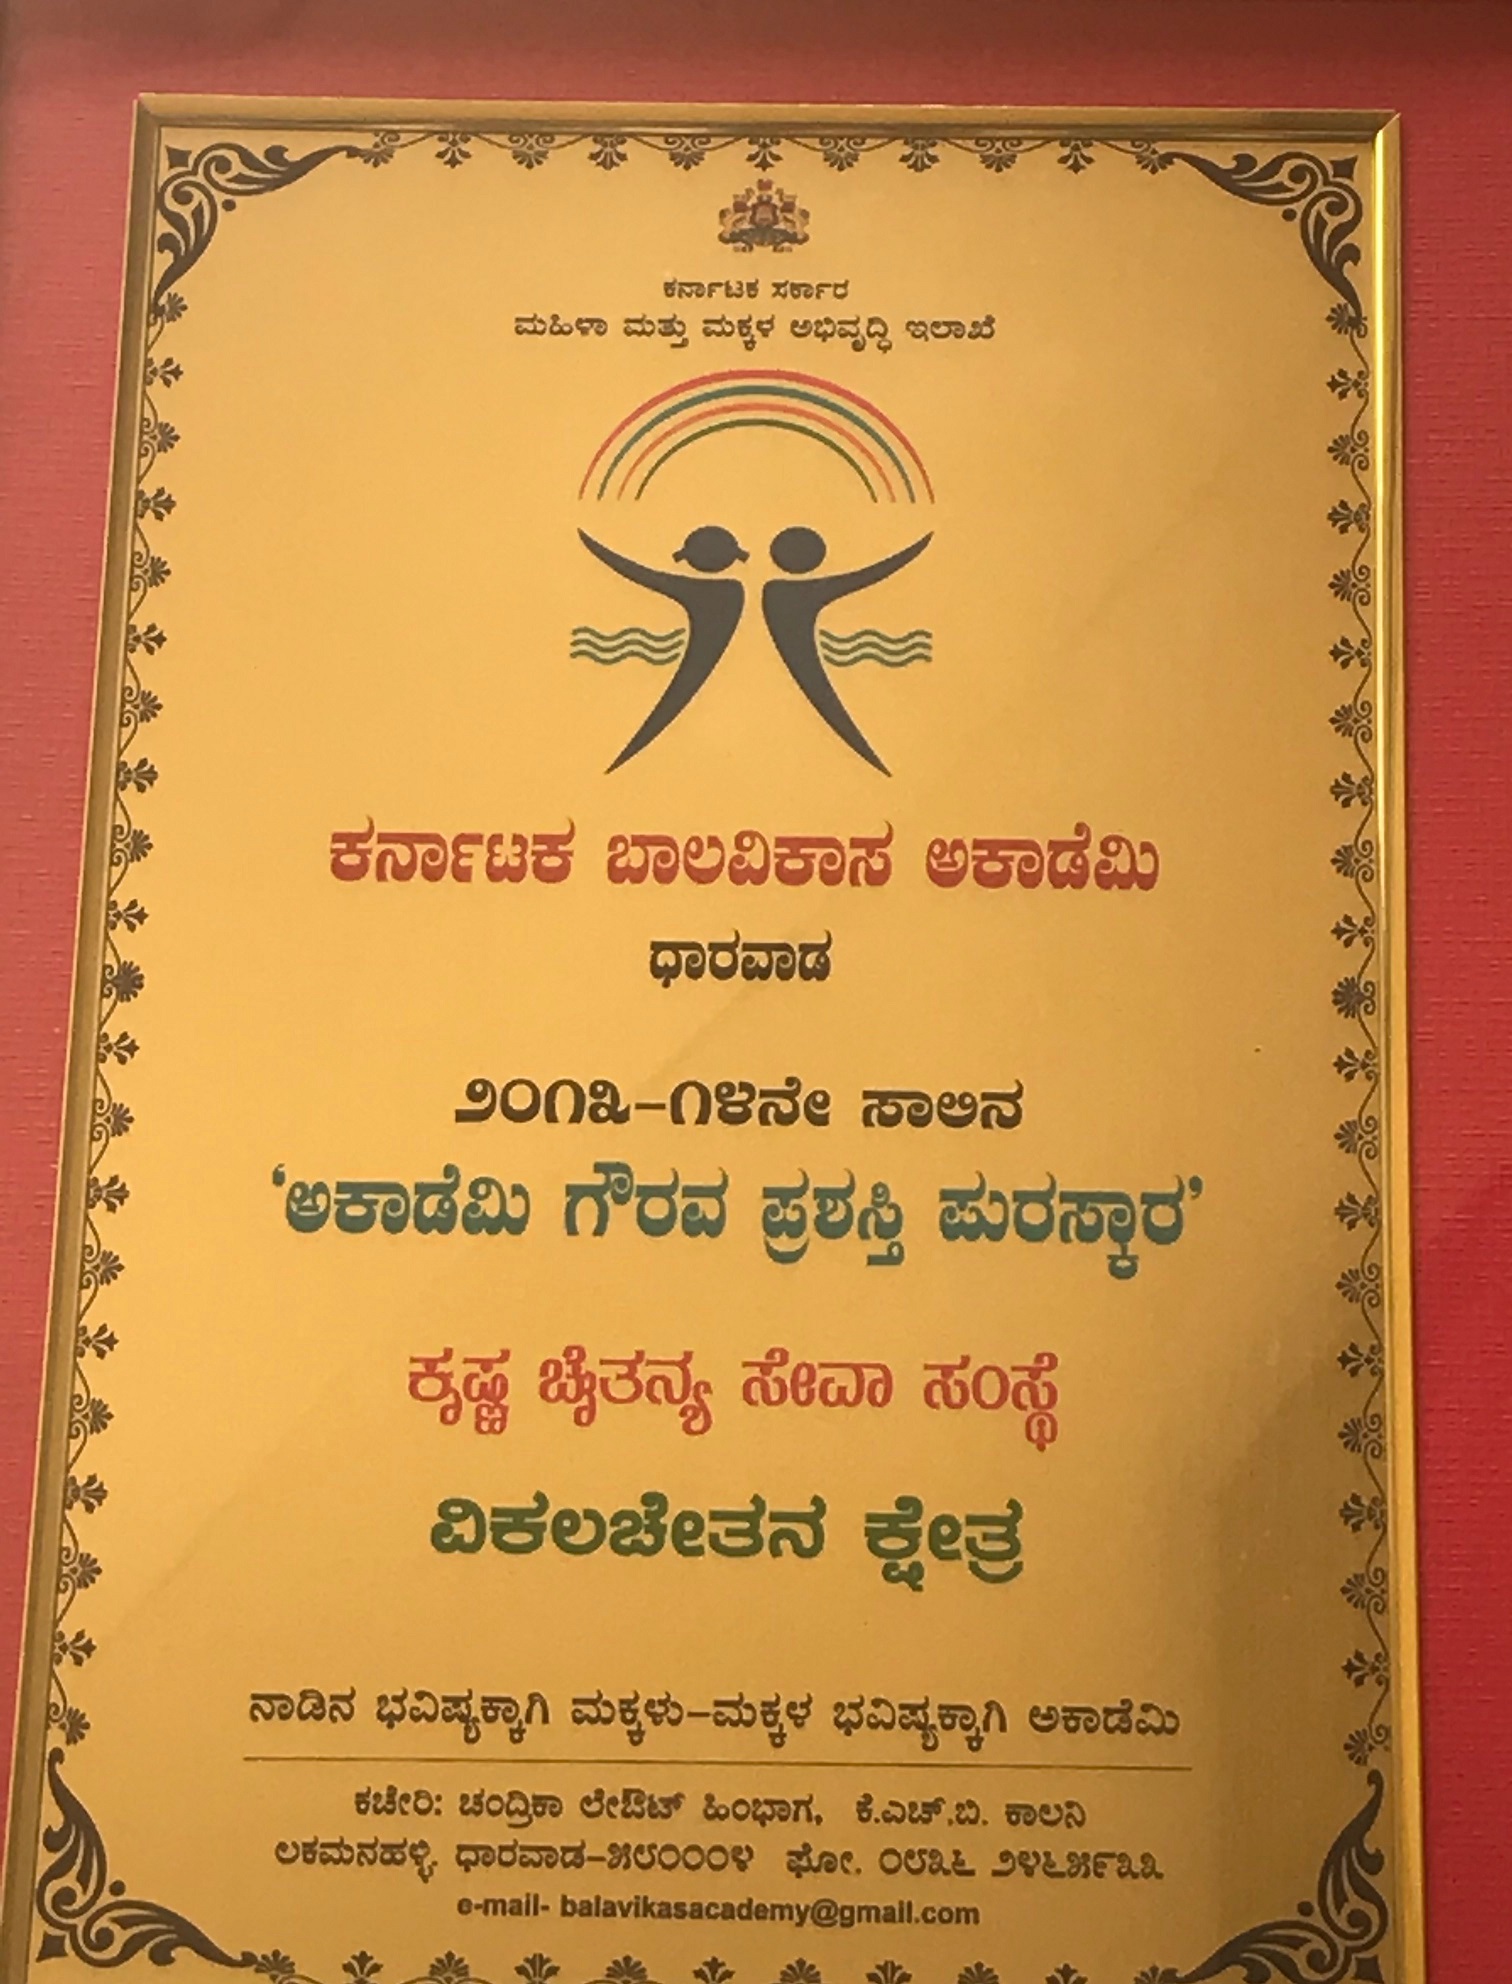 Recognition by the Government of Karnataka for the work done in the field of intellectual disability, especially the selfless quality service provided to economically weaker students.